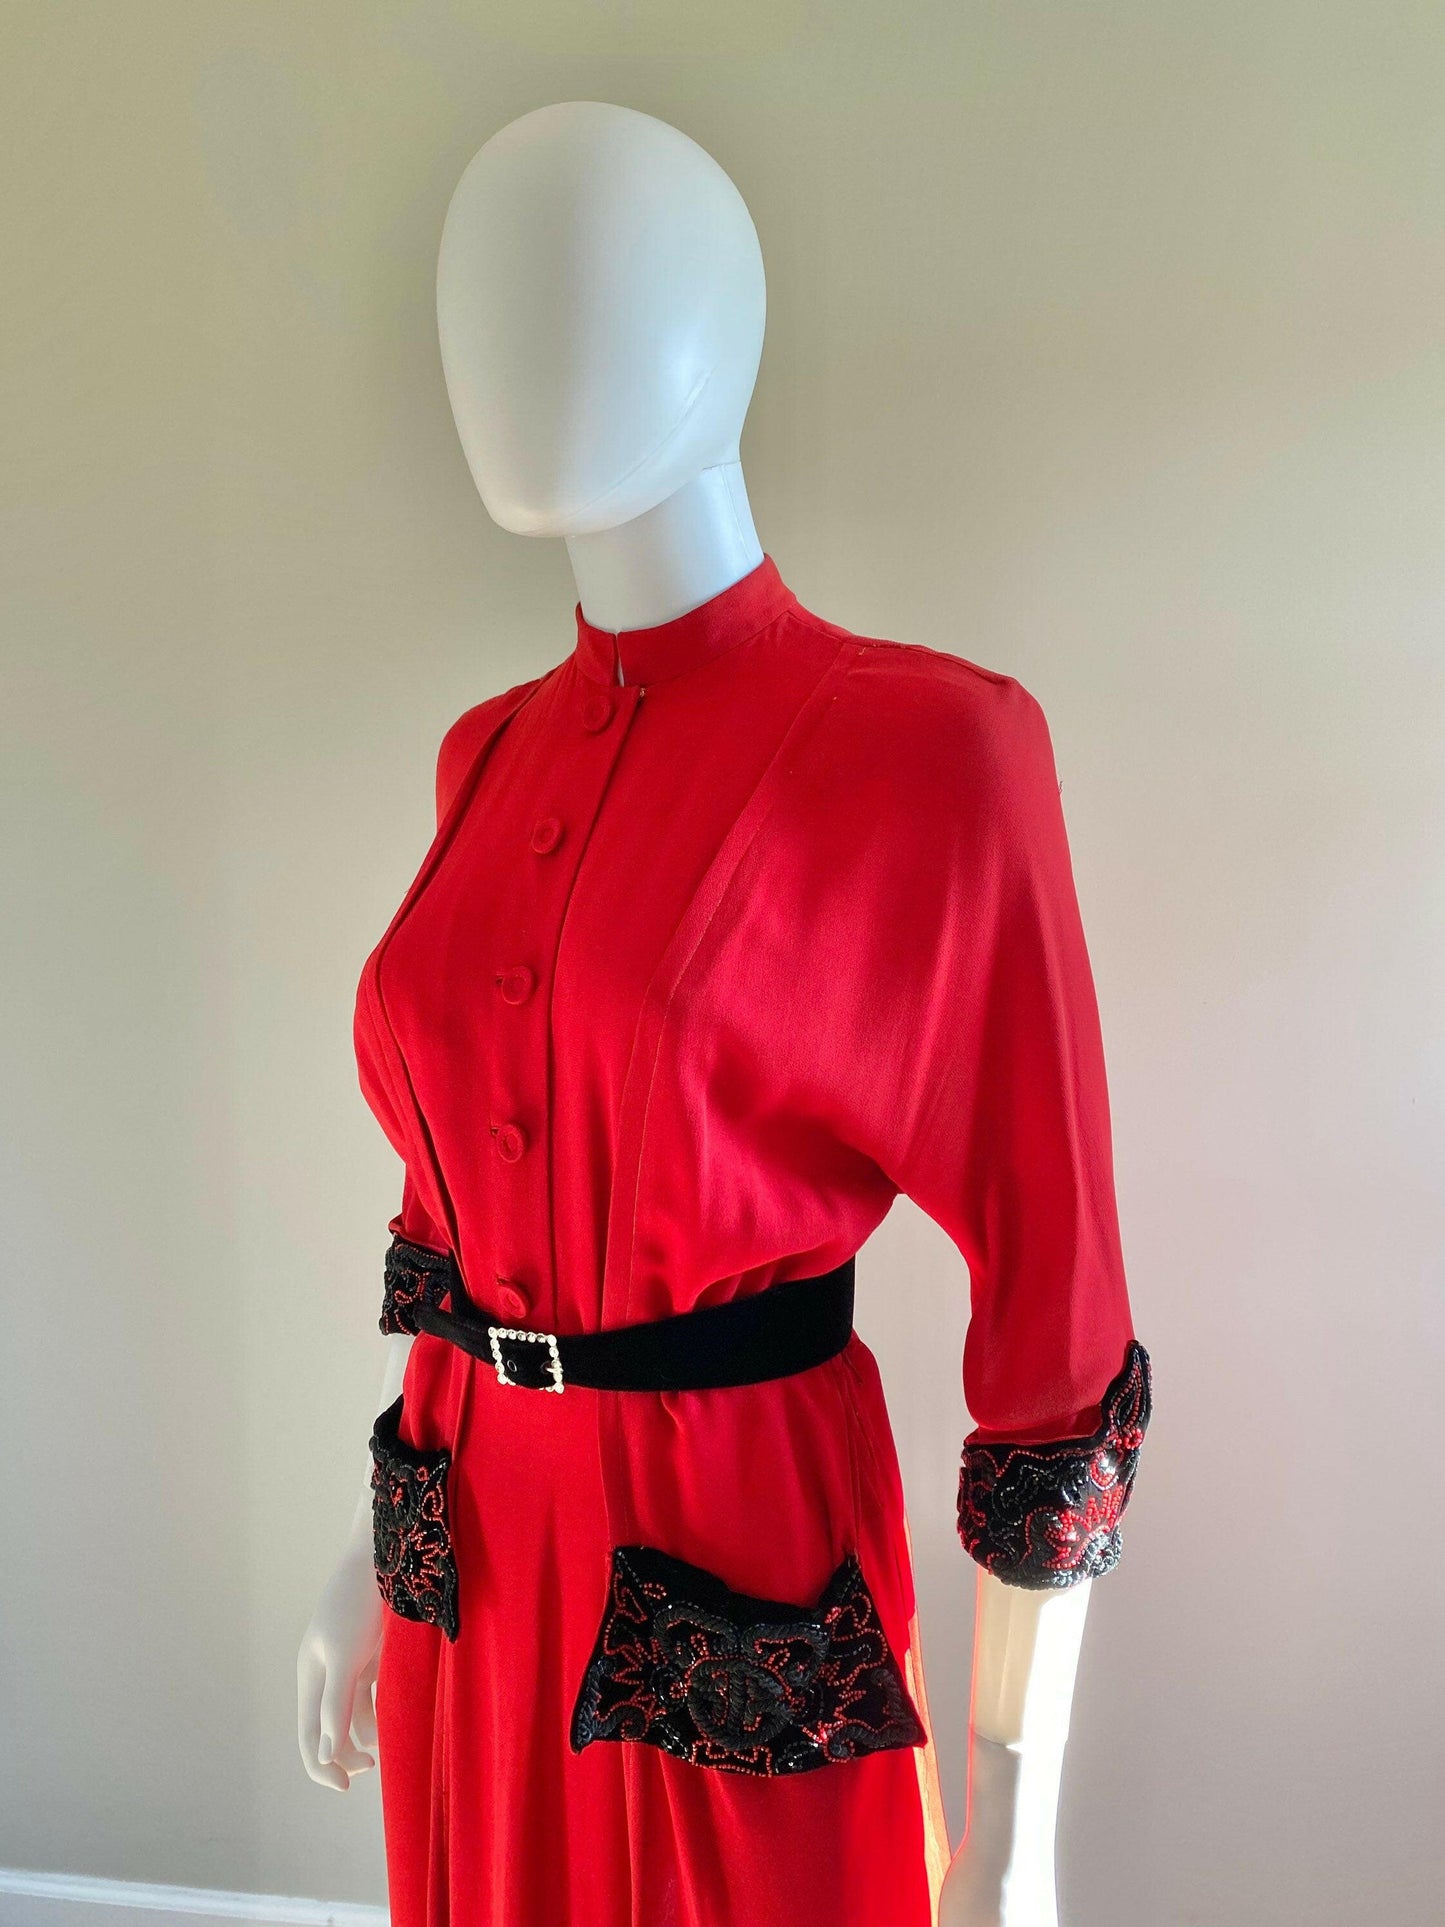 Vintage 1950s Red Rayon Dress / 50s holiday dress Size M